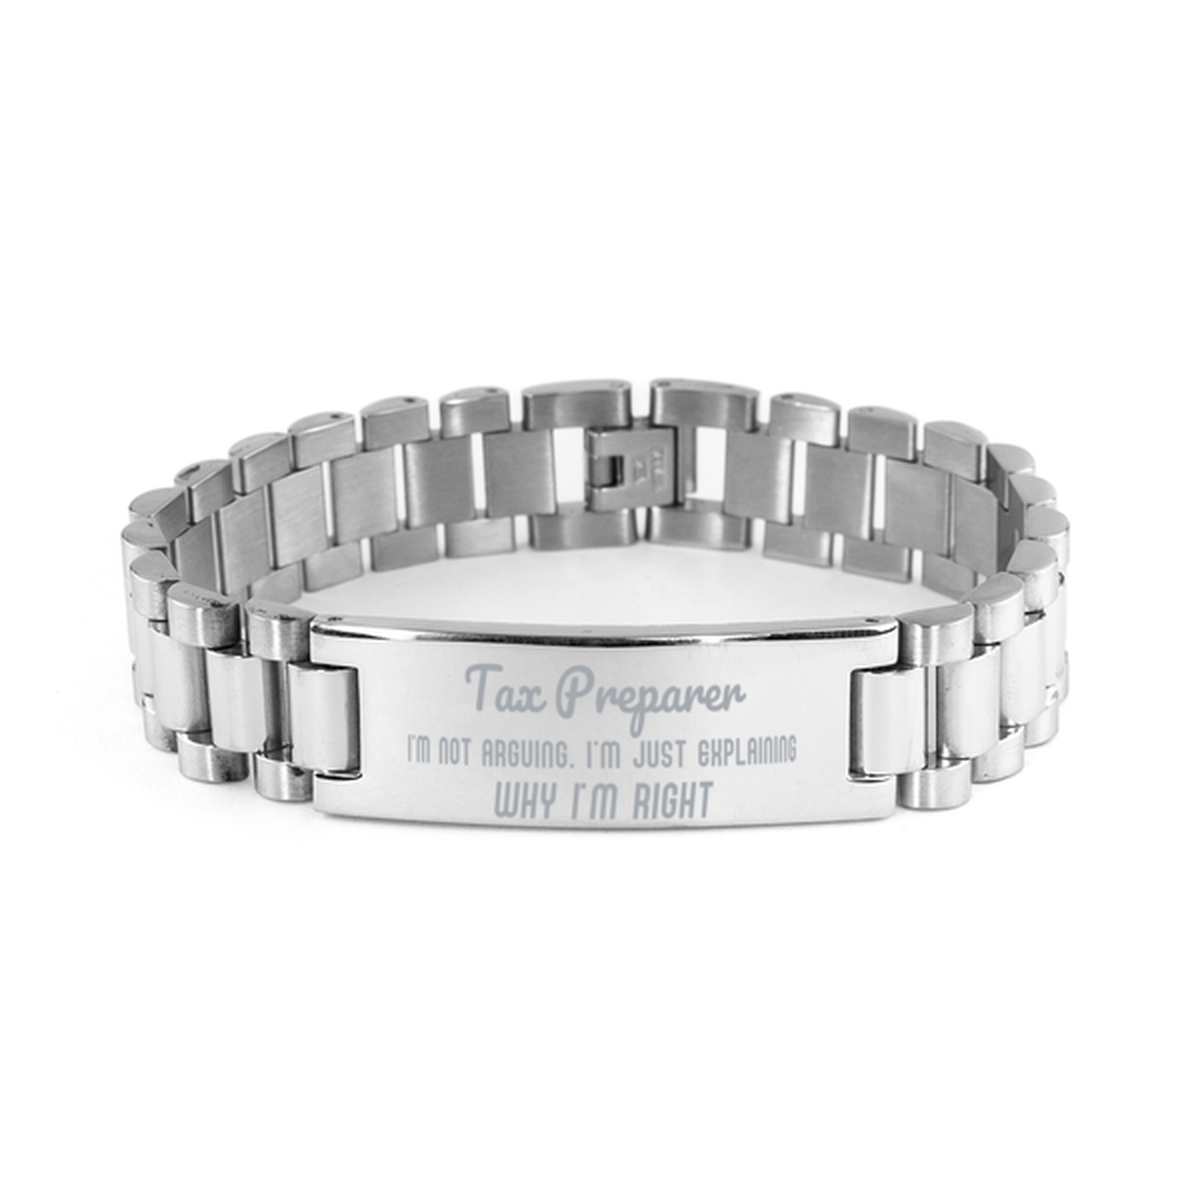 Tax Preparer I'm not Arguing. I'm Just Explaining Why I'm RIGHT Ladder Stainless Steel Bracelet, Graduation Birthday Christmas Tax Preparer Gifts For Tax Preparer Funny Saying Quote Present for Men Women Coworker